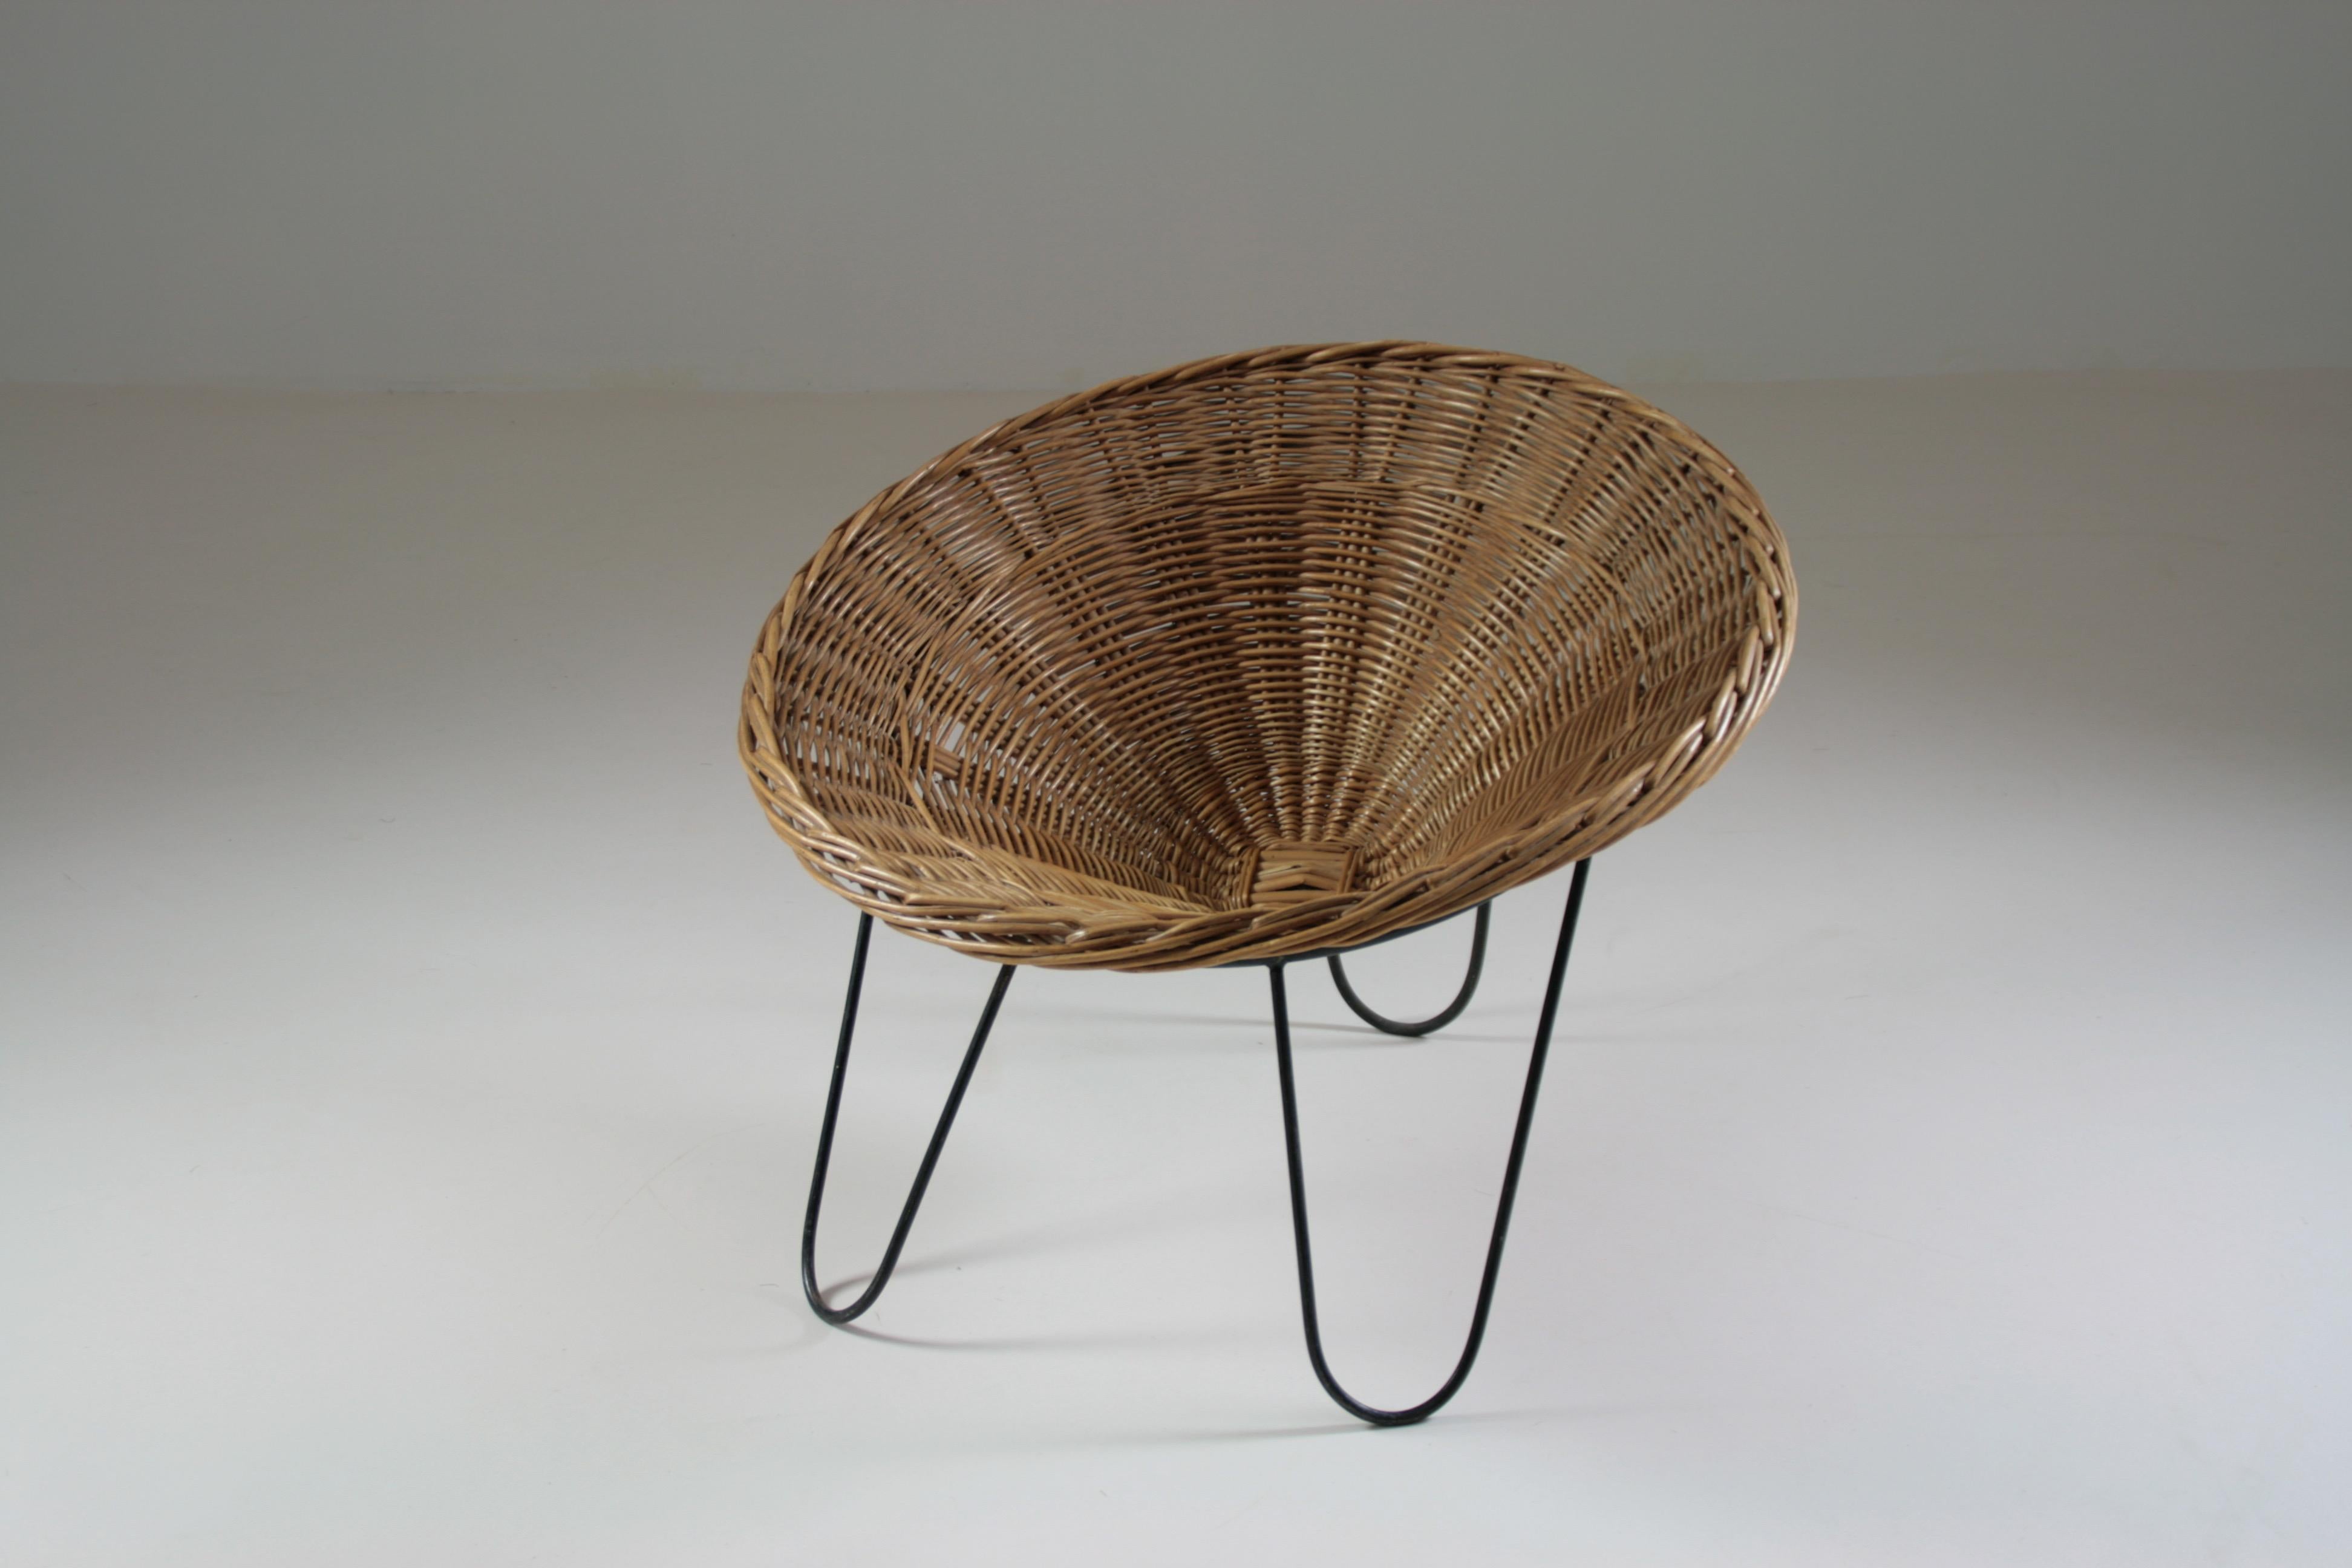 Conical basket armchair in woven wicker from the 1950s. The seat is removable and rests on the black metal tripod base. Only one small sectioned strand to mention (photo). The chair is in very good condition.
Dimensions: W76 x D70 x H60 cm
Seat